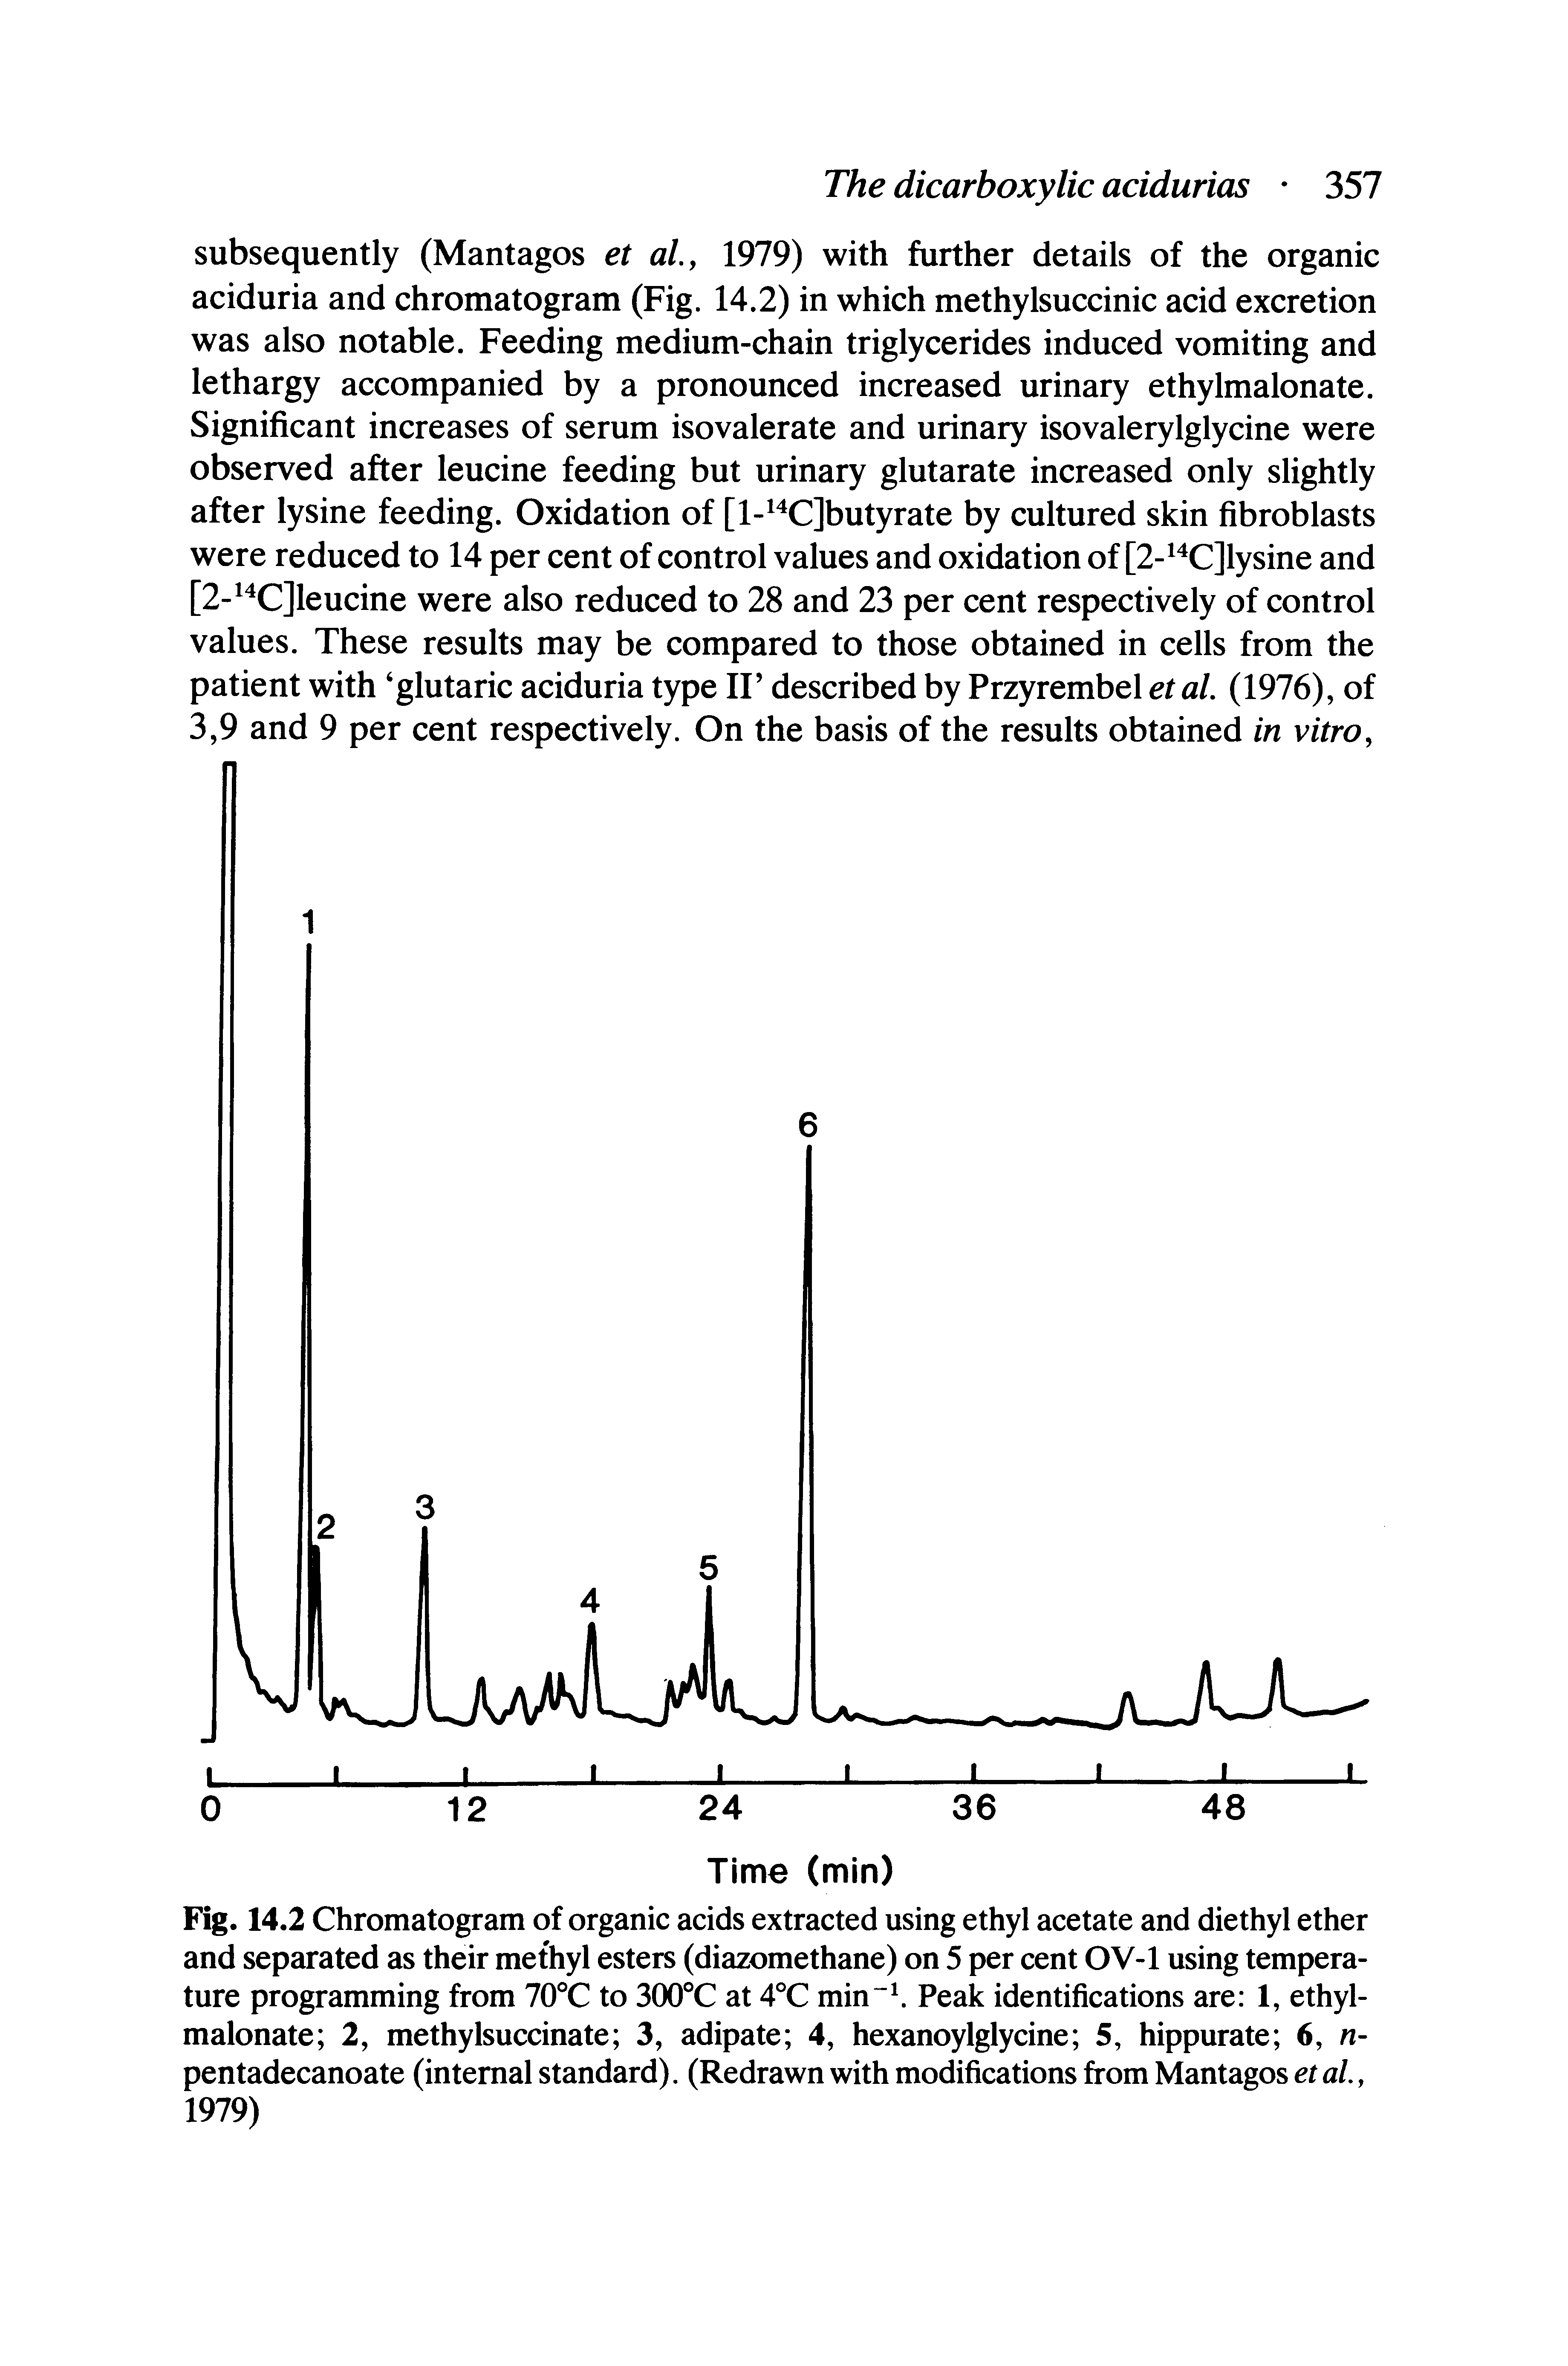 Fig. 14.2 Chromatogram of organic acids extracted using ethyl acetate and diethyl ether and separated as their methyl esters (diazomethane) on 5 per cent OV-1 using temperature programming from 70°C to 300°C at 4°C min Peak identifications are 1, ethylmalonate 2, methylsuccinate 3, adipate 4, hexanoylglycine 5, hippurate 6, n-pentadecanoate (internal standard). (Redrawn with modifications from Mantagos et al., 1979)...